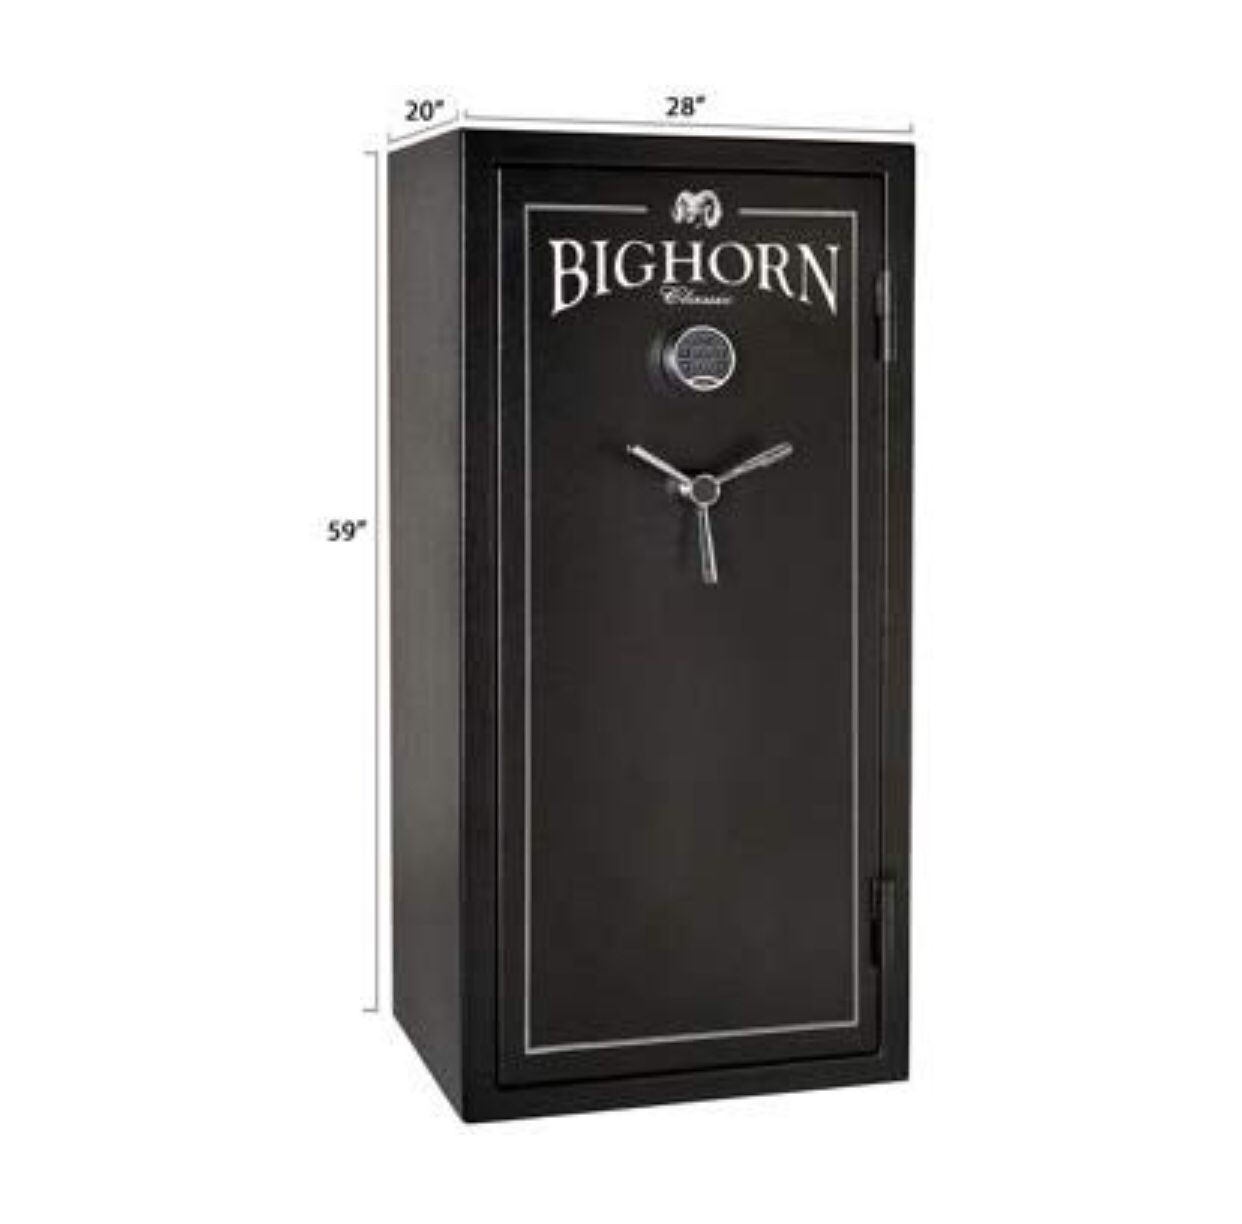 BIGHORN 19ECB Gun Safe. Thicker steel (2.75mm) and extra fire lining provides more security and fire protection